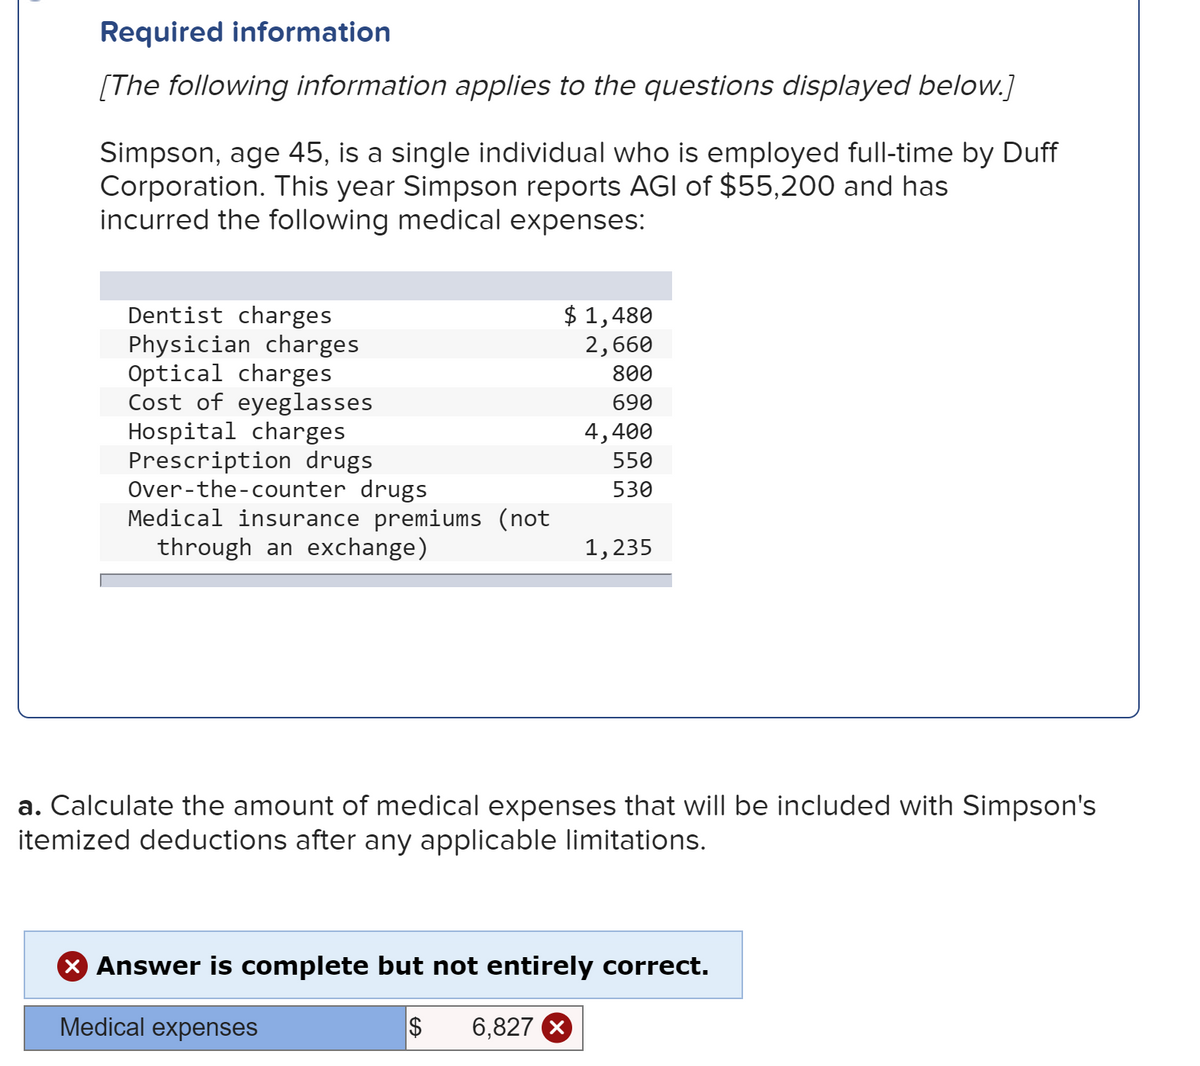 Required information
[The following information applies to the questions displayed below.]
Simpson, age 45, is a single individual who is employed full-time by Duff
Corporation. This year Simpson reports AGI of $55,200 and has
incurred the following medical expenses:
$ 1,480
2,660
Dentist charges
Physician charges
Optical charges
Cost of eyeglasses
Hospital charges
Prescription drugs
Over-the-counter drugs
Medical insurance premiums (not
through an exchange)
800
690
4,400
550
530
1,235
a. Calculate the amount of medical expenses that will be included with Simpson's
itemized deductions after any applicable limitations.
X Answer is complete but not entirely correct.
Medical expenses
6,827 X
